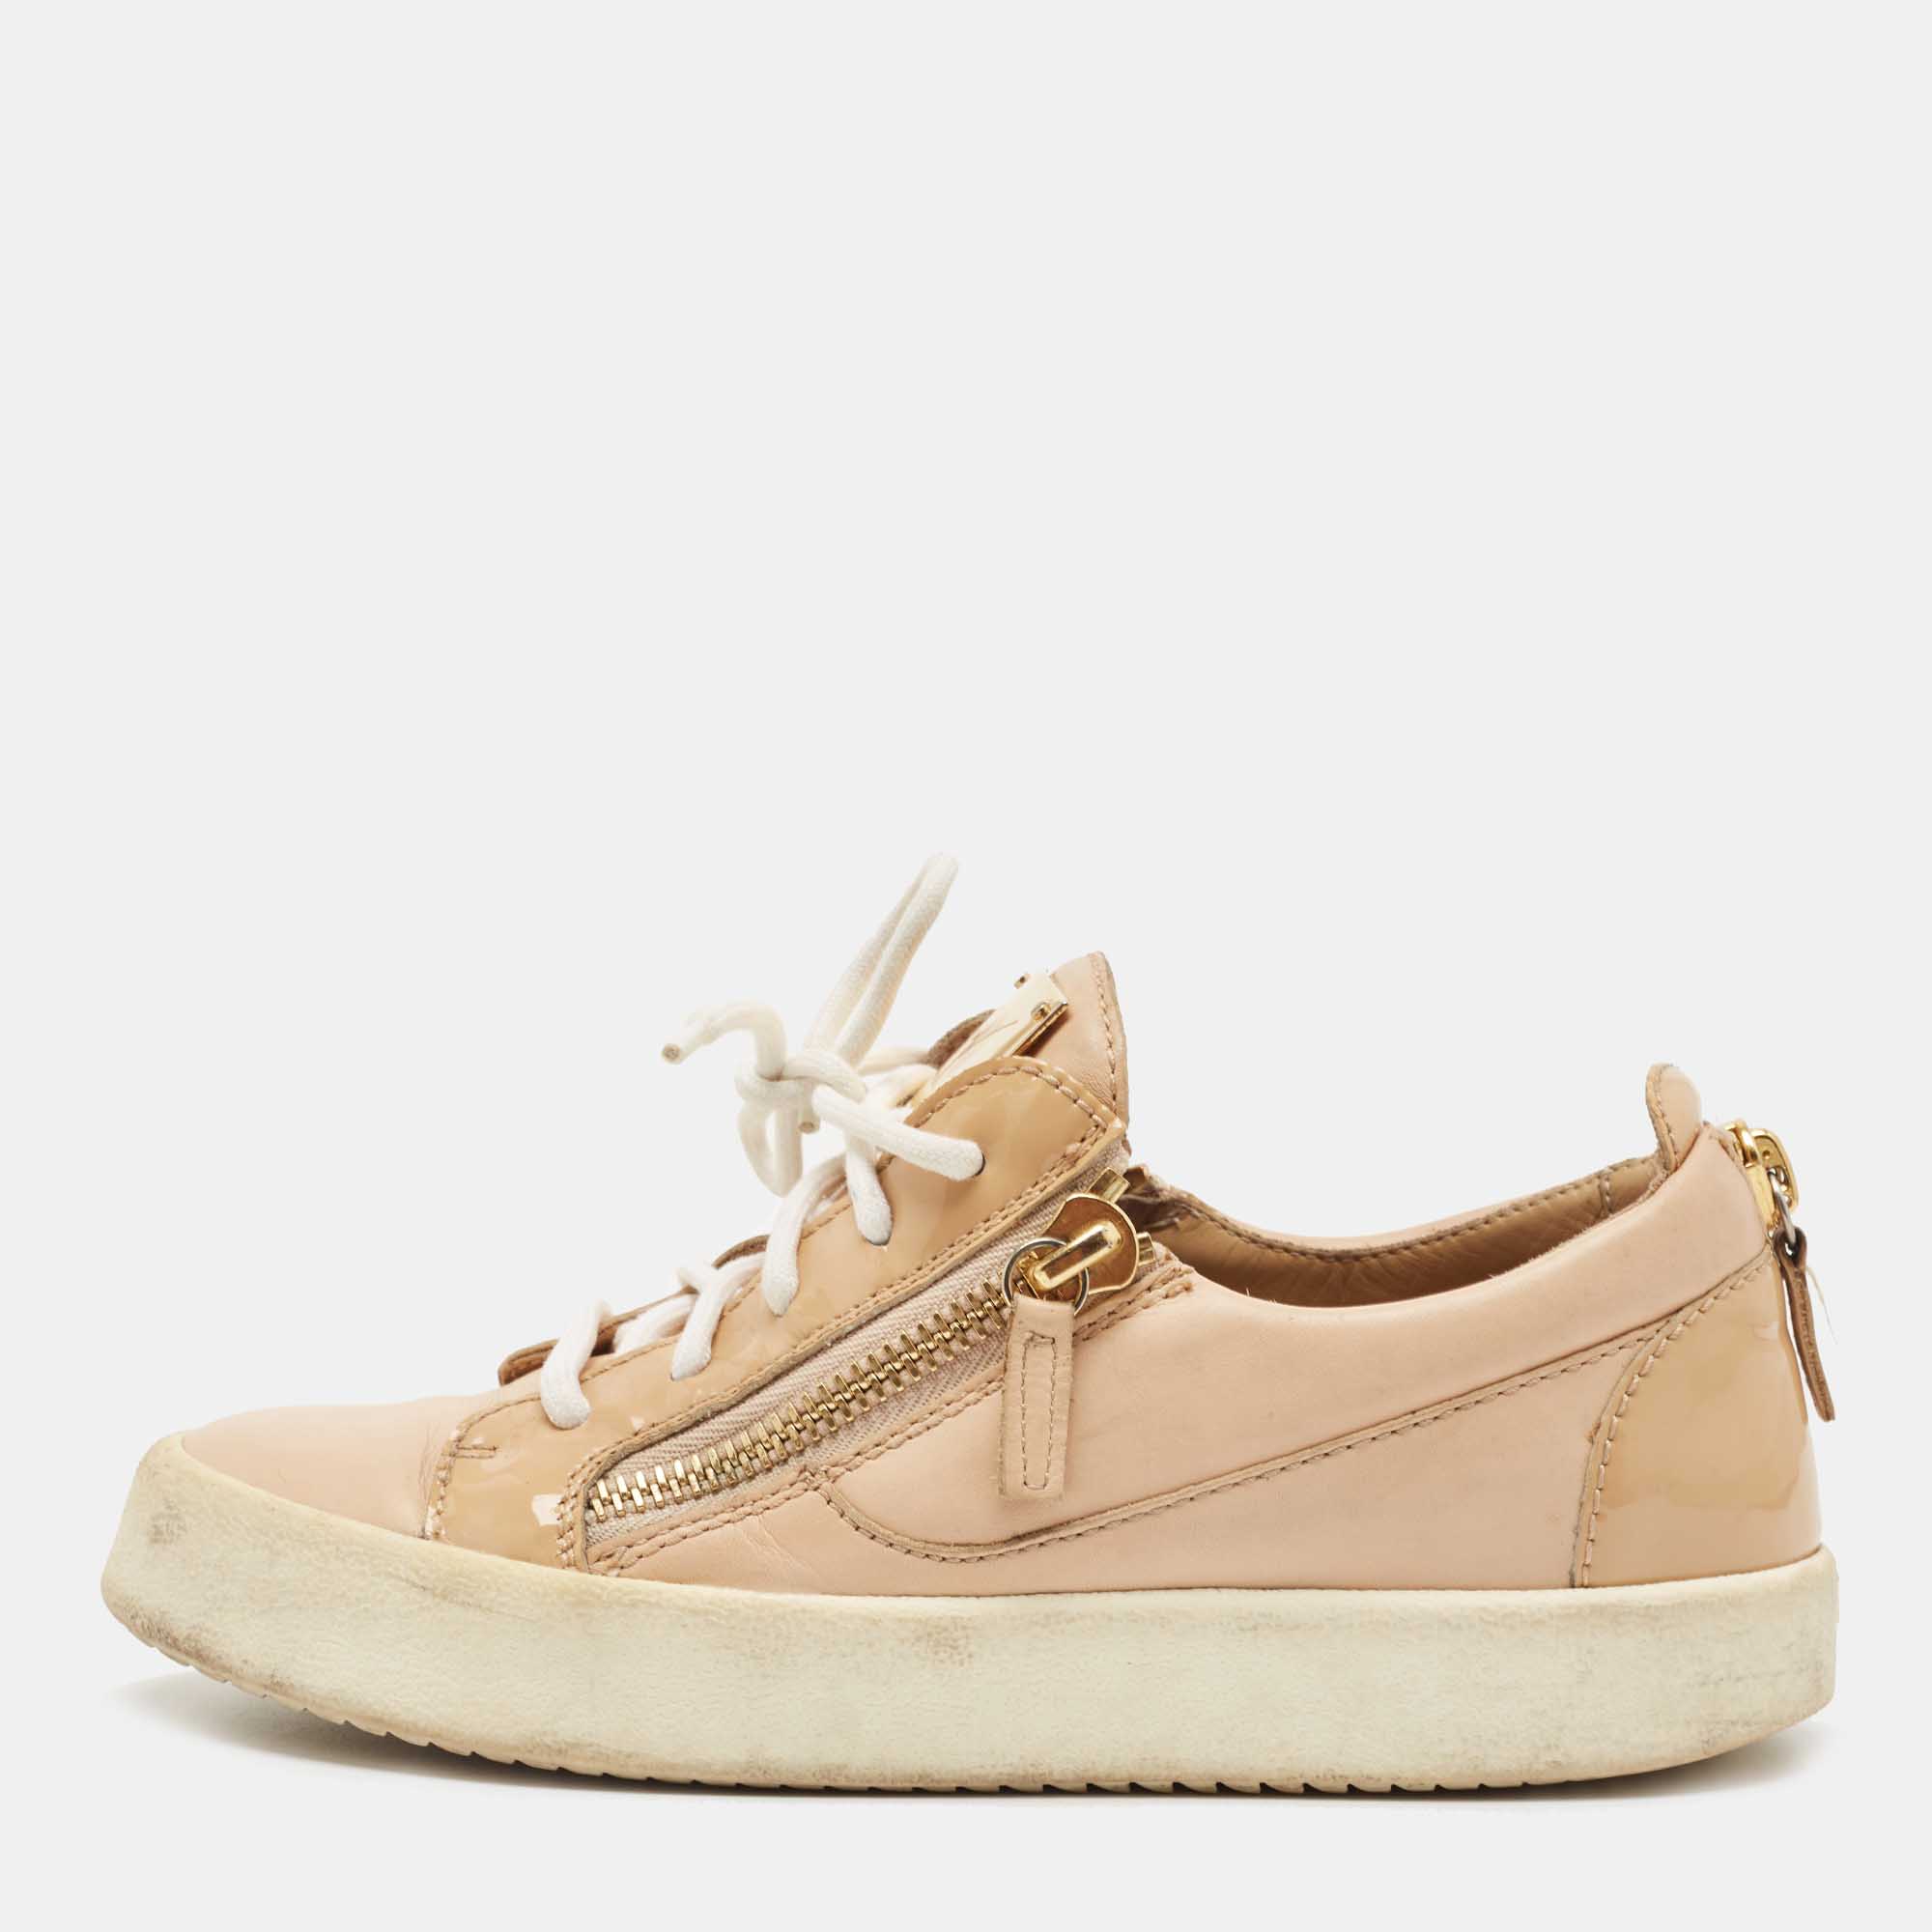 Giuseppe Zanotti Beige Patent And Leather Low Top Sneakers Size 38